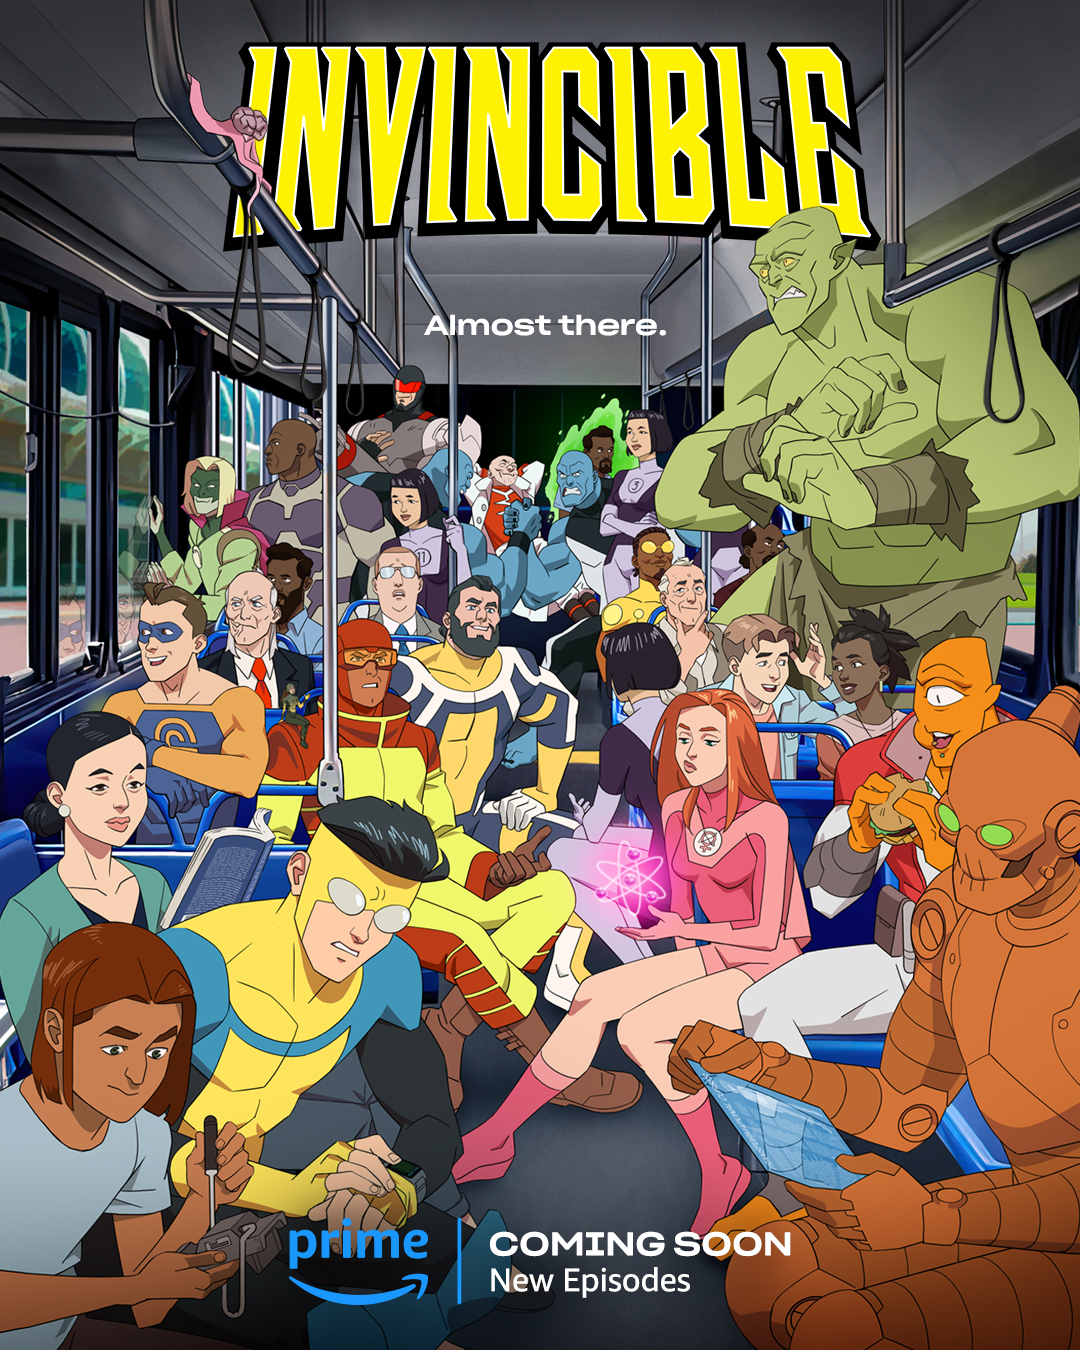 Invincible S2 tease art! Oh boy, this is a lot of characters to describe. They're all crammed into a bus, with text "Almost there" written above them. In the front left, Rudy Connors sits with Invincible and Debbie Grayson. Behind them are Rex Splode, and someone we haven't met yet in a blue and orange suit. Immortal and Cecil are in the seat behind them. Is that Donald?!?!?!? Next to him are a lizard-looking creature in a green suit plus someone with a beard and a blue shirt. Black Samson, a Dupli-Kate, Killcannon, Doc Seismic, the Mauler Twins, and another Dupli-Kate are in the back of the bus. There's also a guy with a portal?? On the right side of the bus, there's someone with yellow goggles, Art Rosenbaum, Monster Girl, William and Amber, yet another Dupli-Kate, Atom Eve (!!!), Allen the Alien eating a burger, and Robot looking at some sort of screen. Also just noticed one of those sequid things from Mars on the top rail, that can't be good.